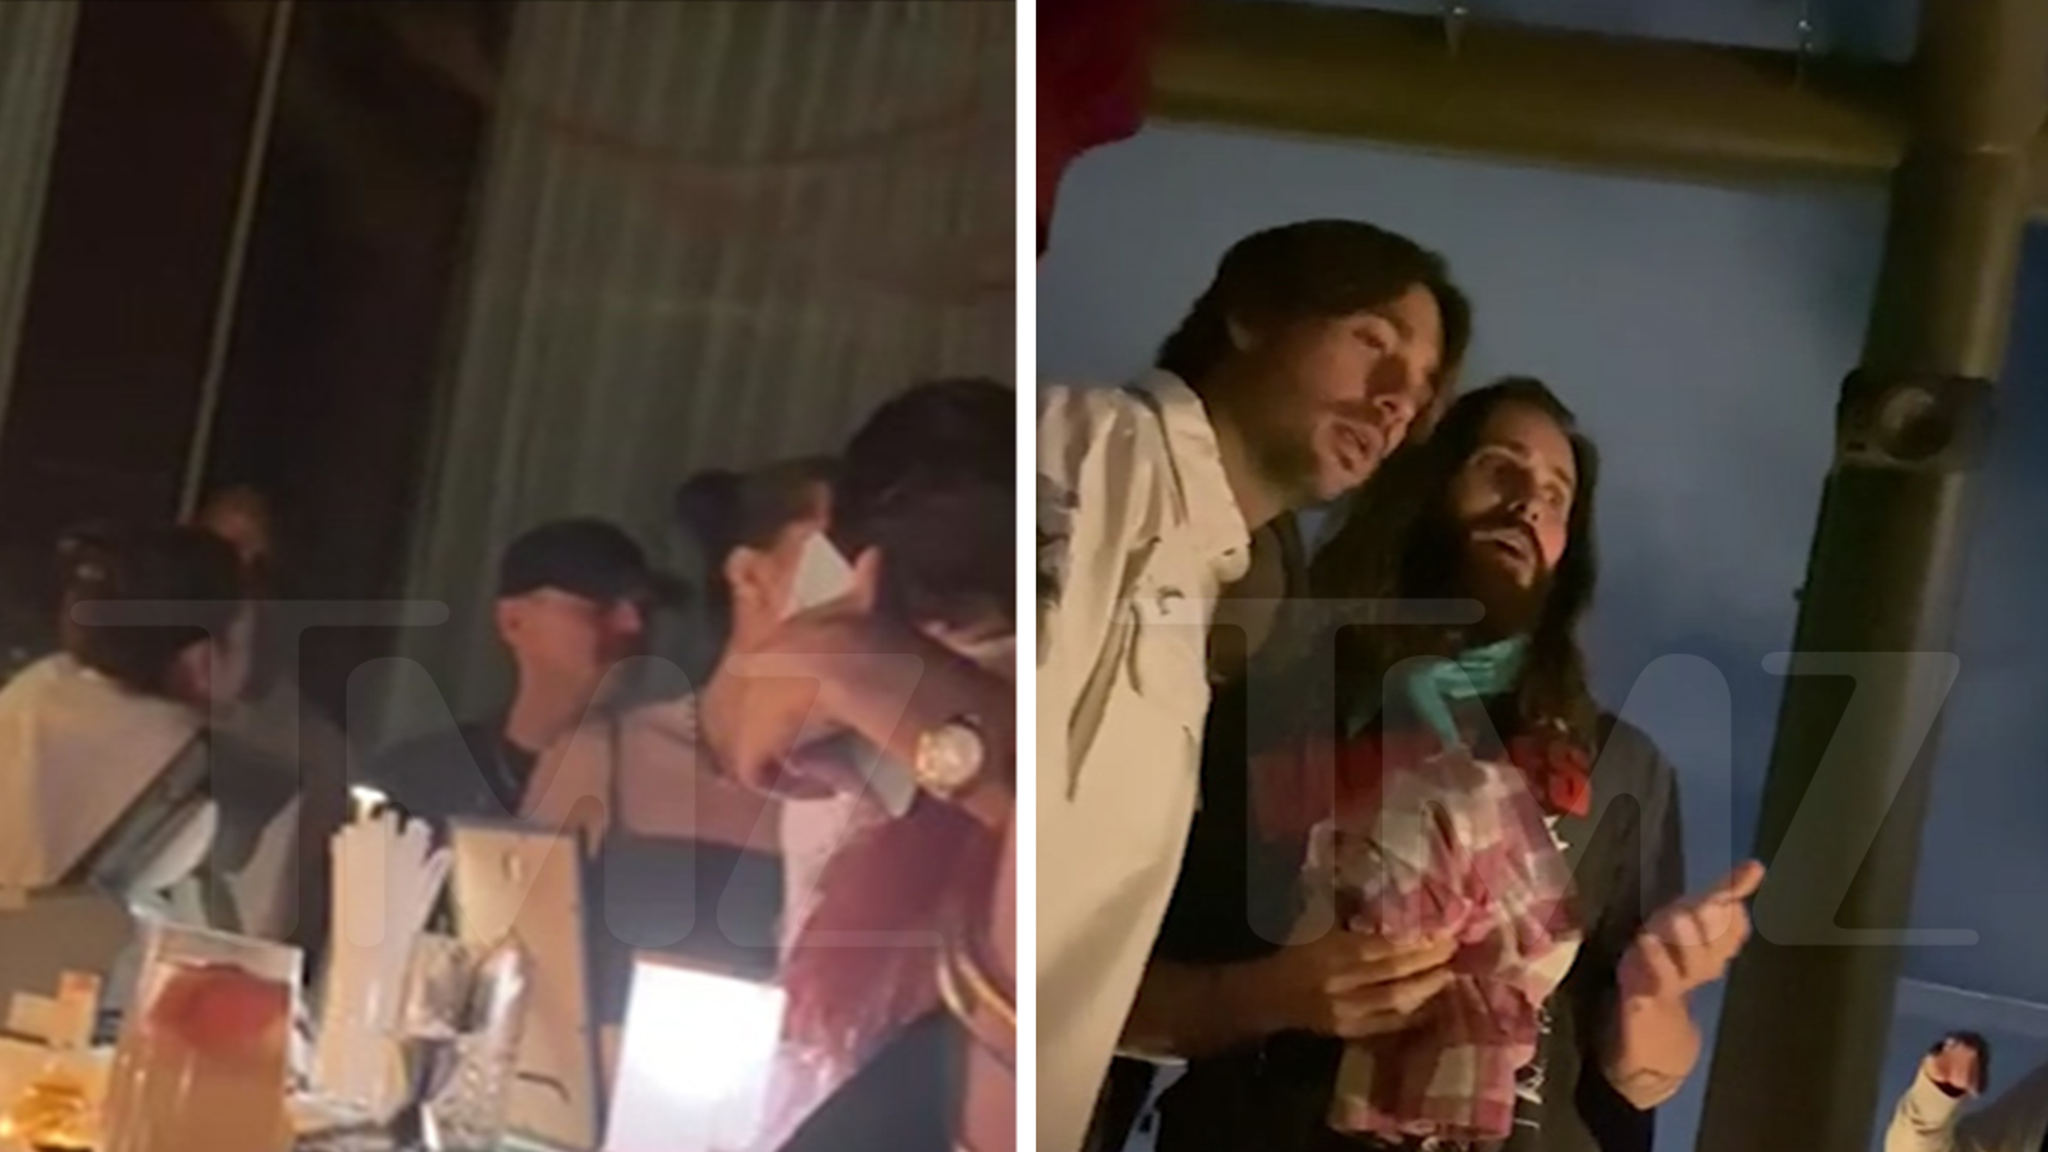 Leonardo DiCaprio hangs out with Jared Leto at a party during New York Fashion Week